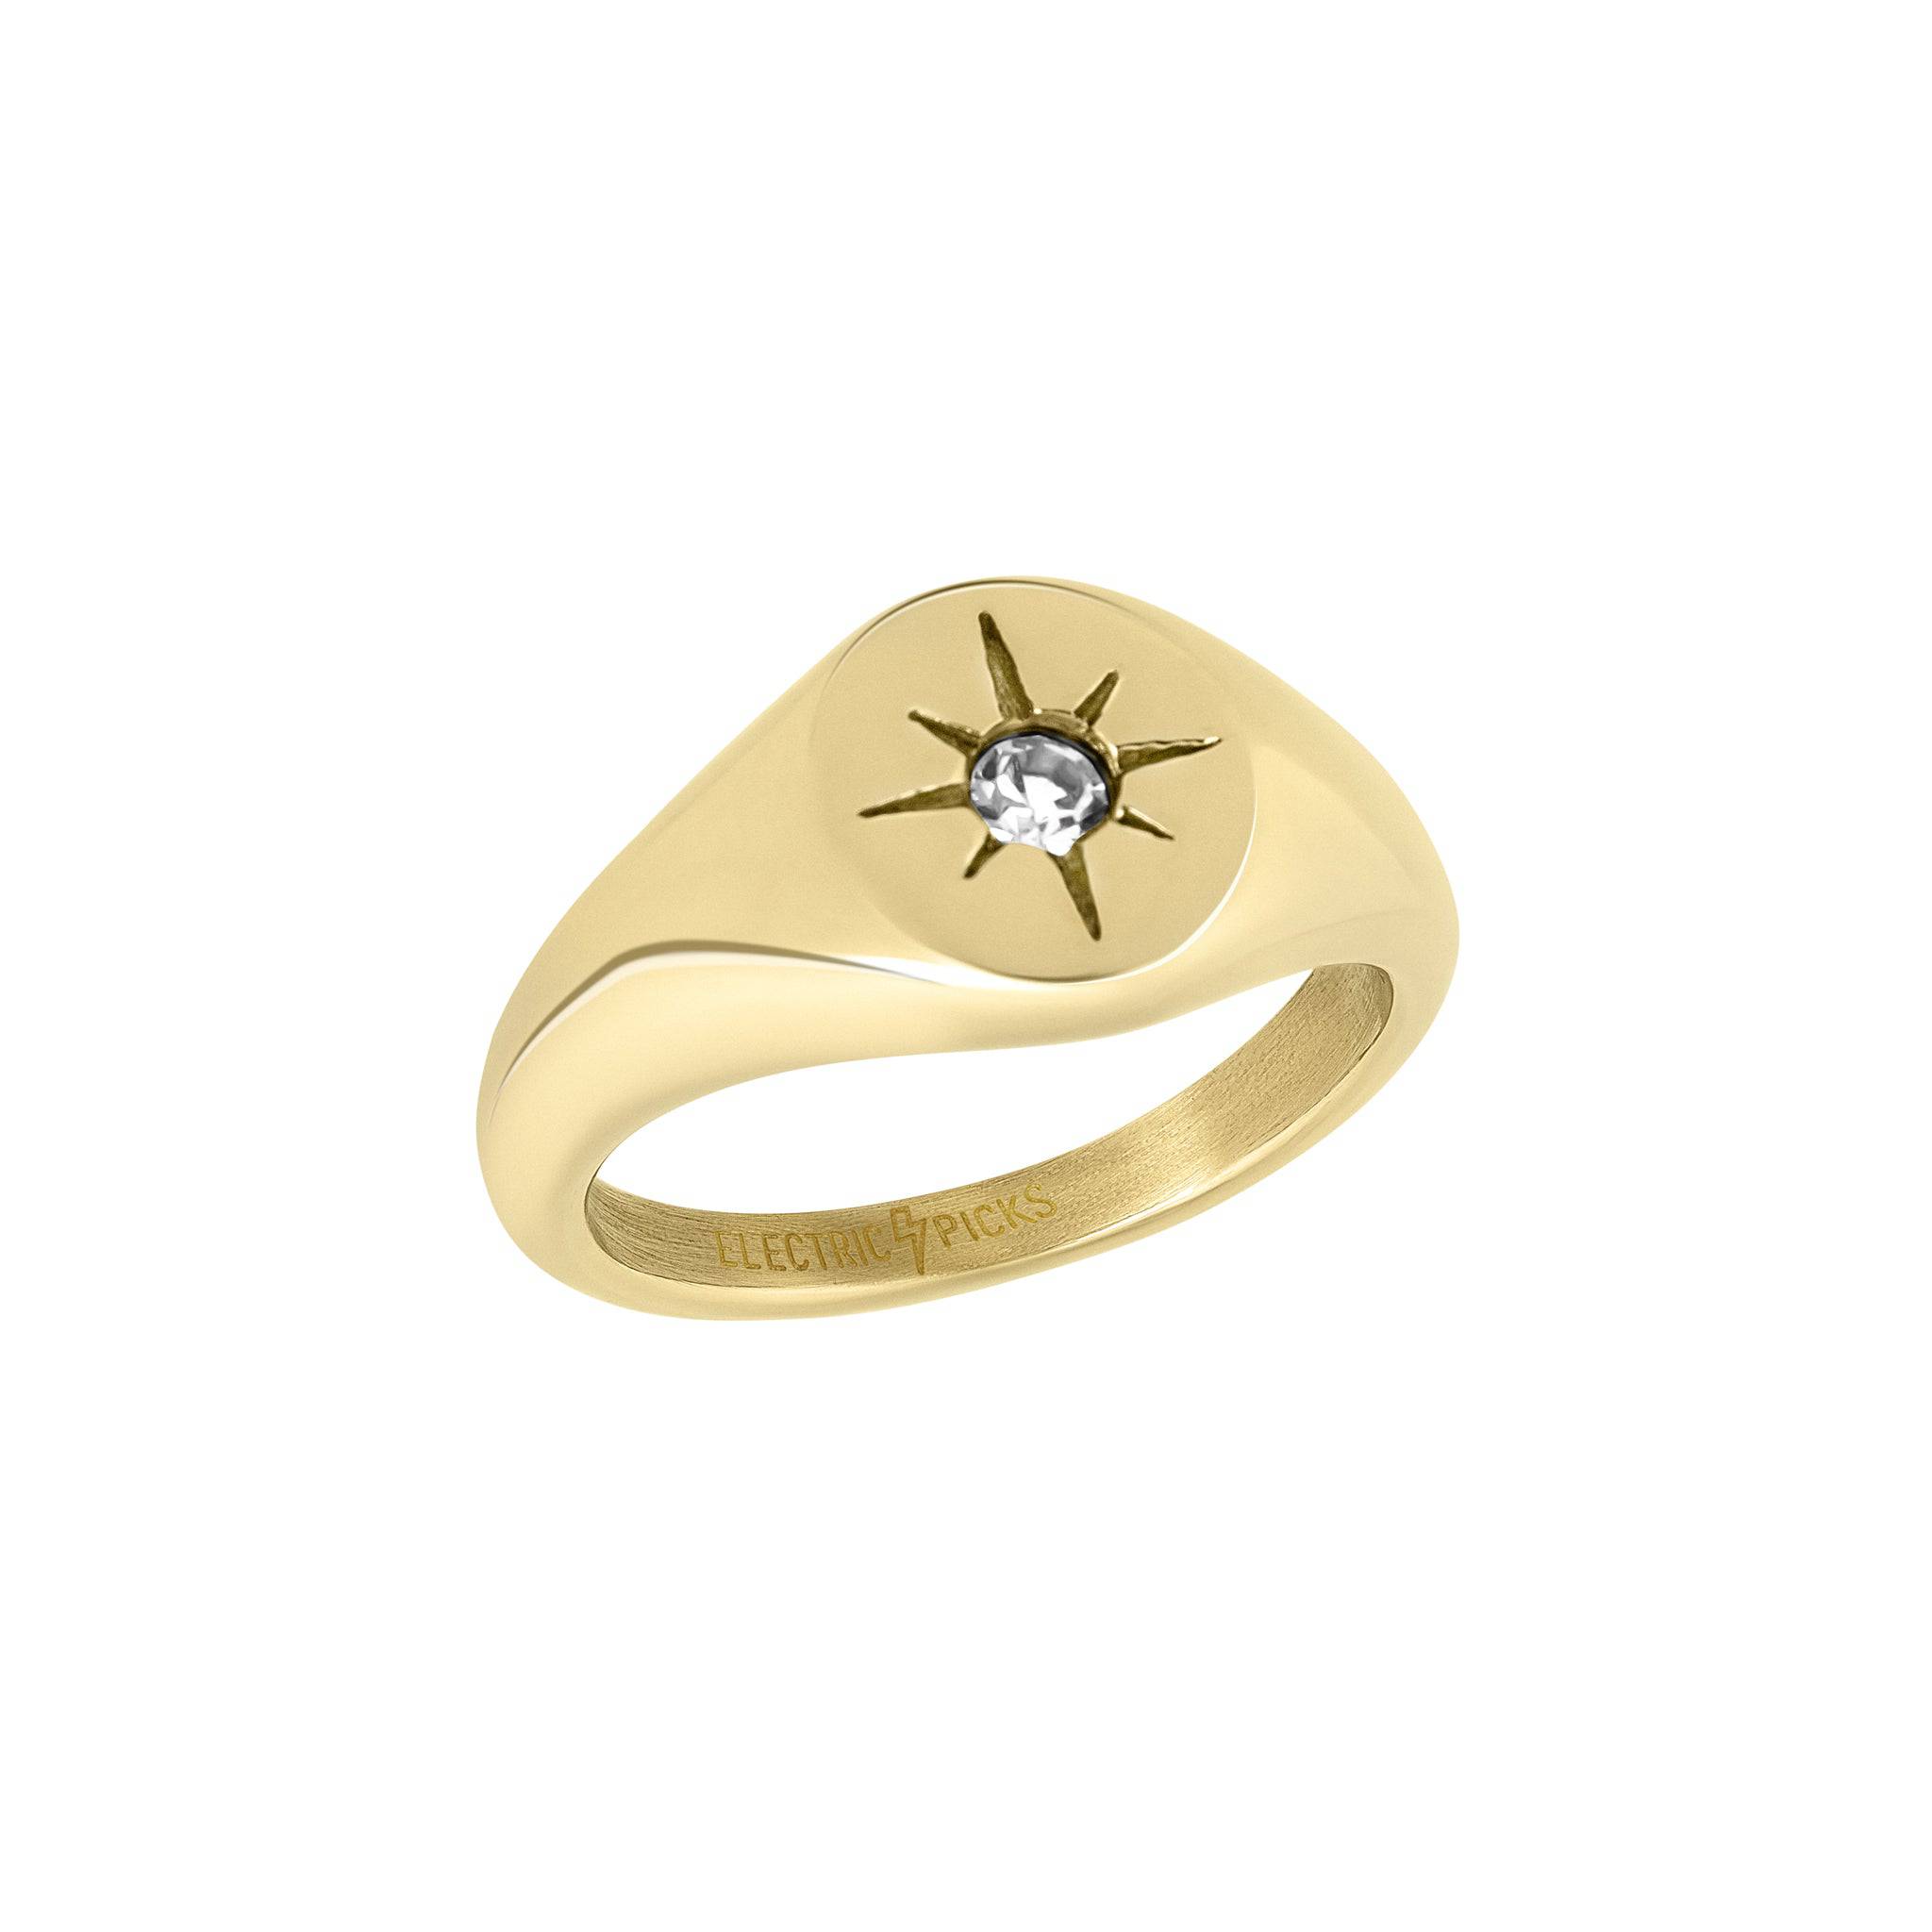 North Star Ring - The Gilded Witch